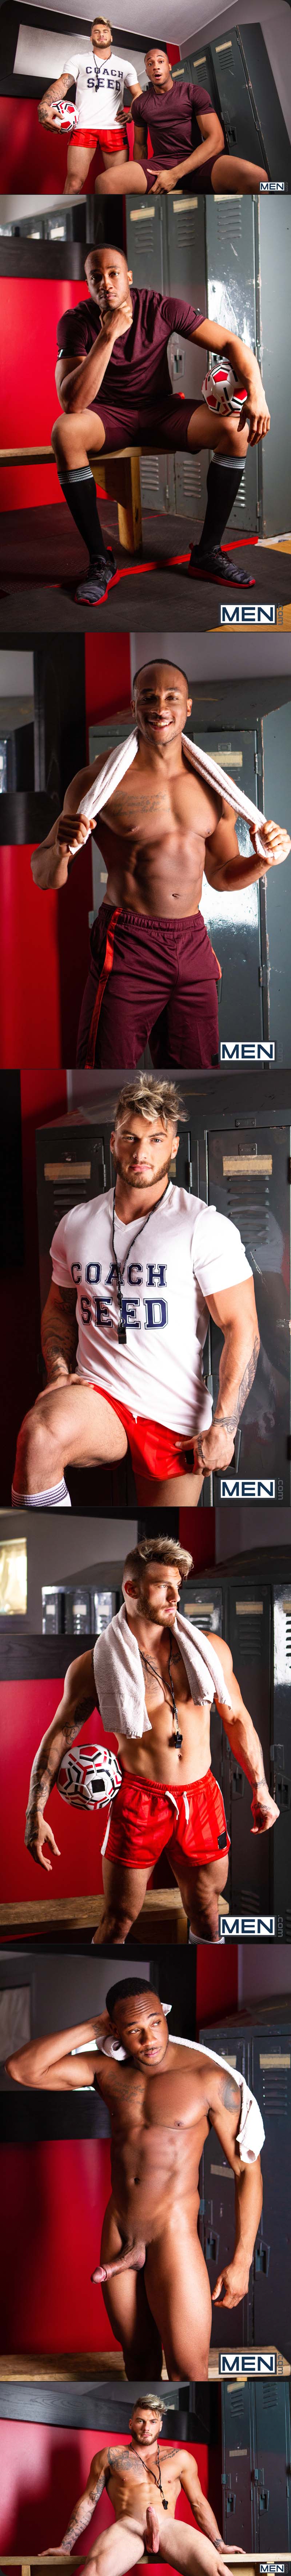 Coach Seed (William Seed Fucks Trent King) at Drill My Hole